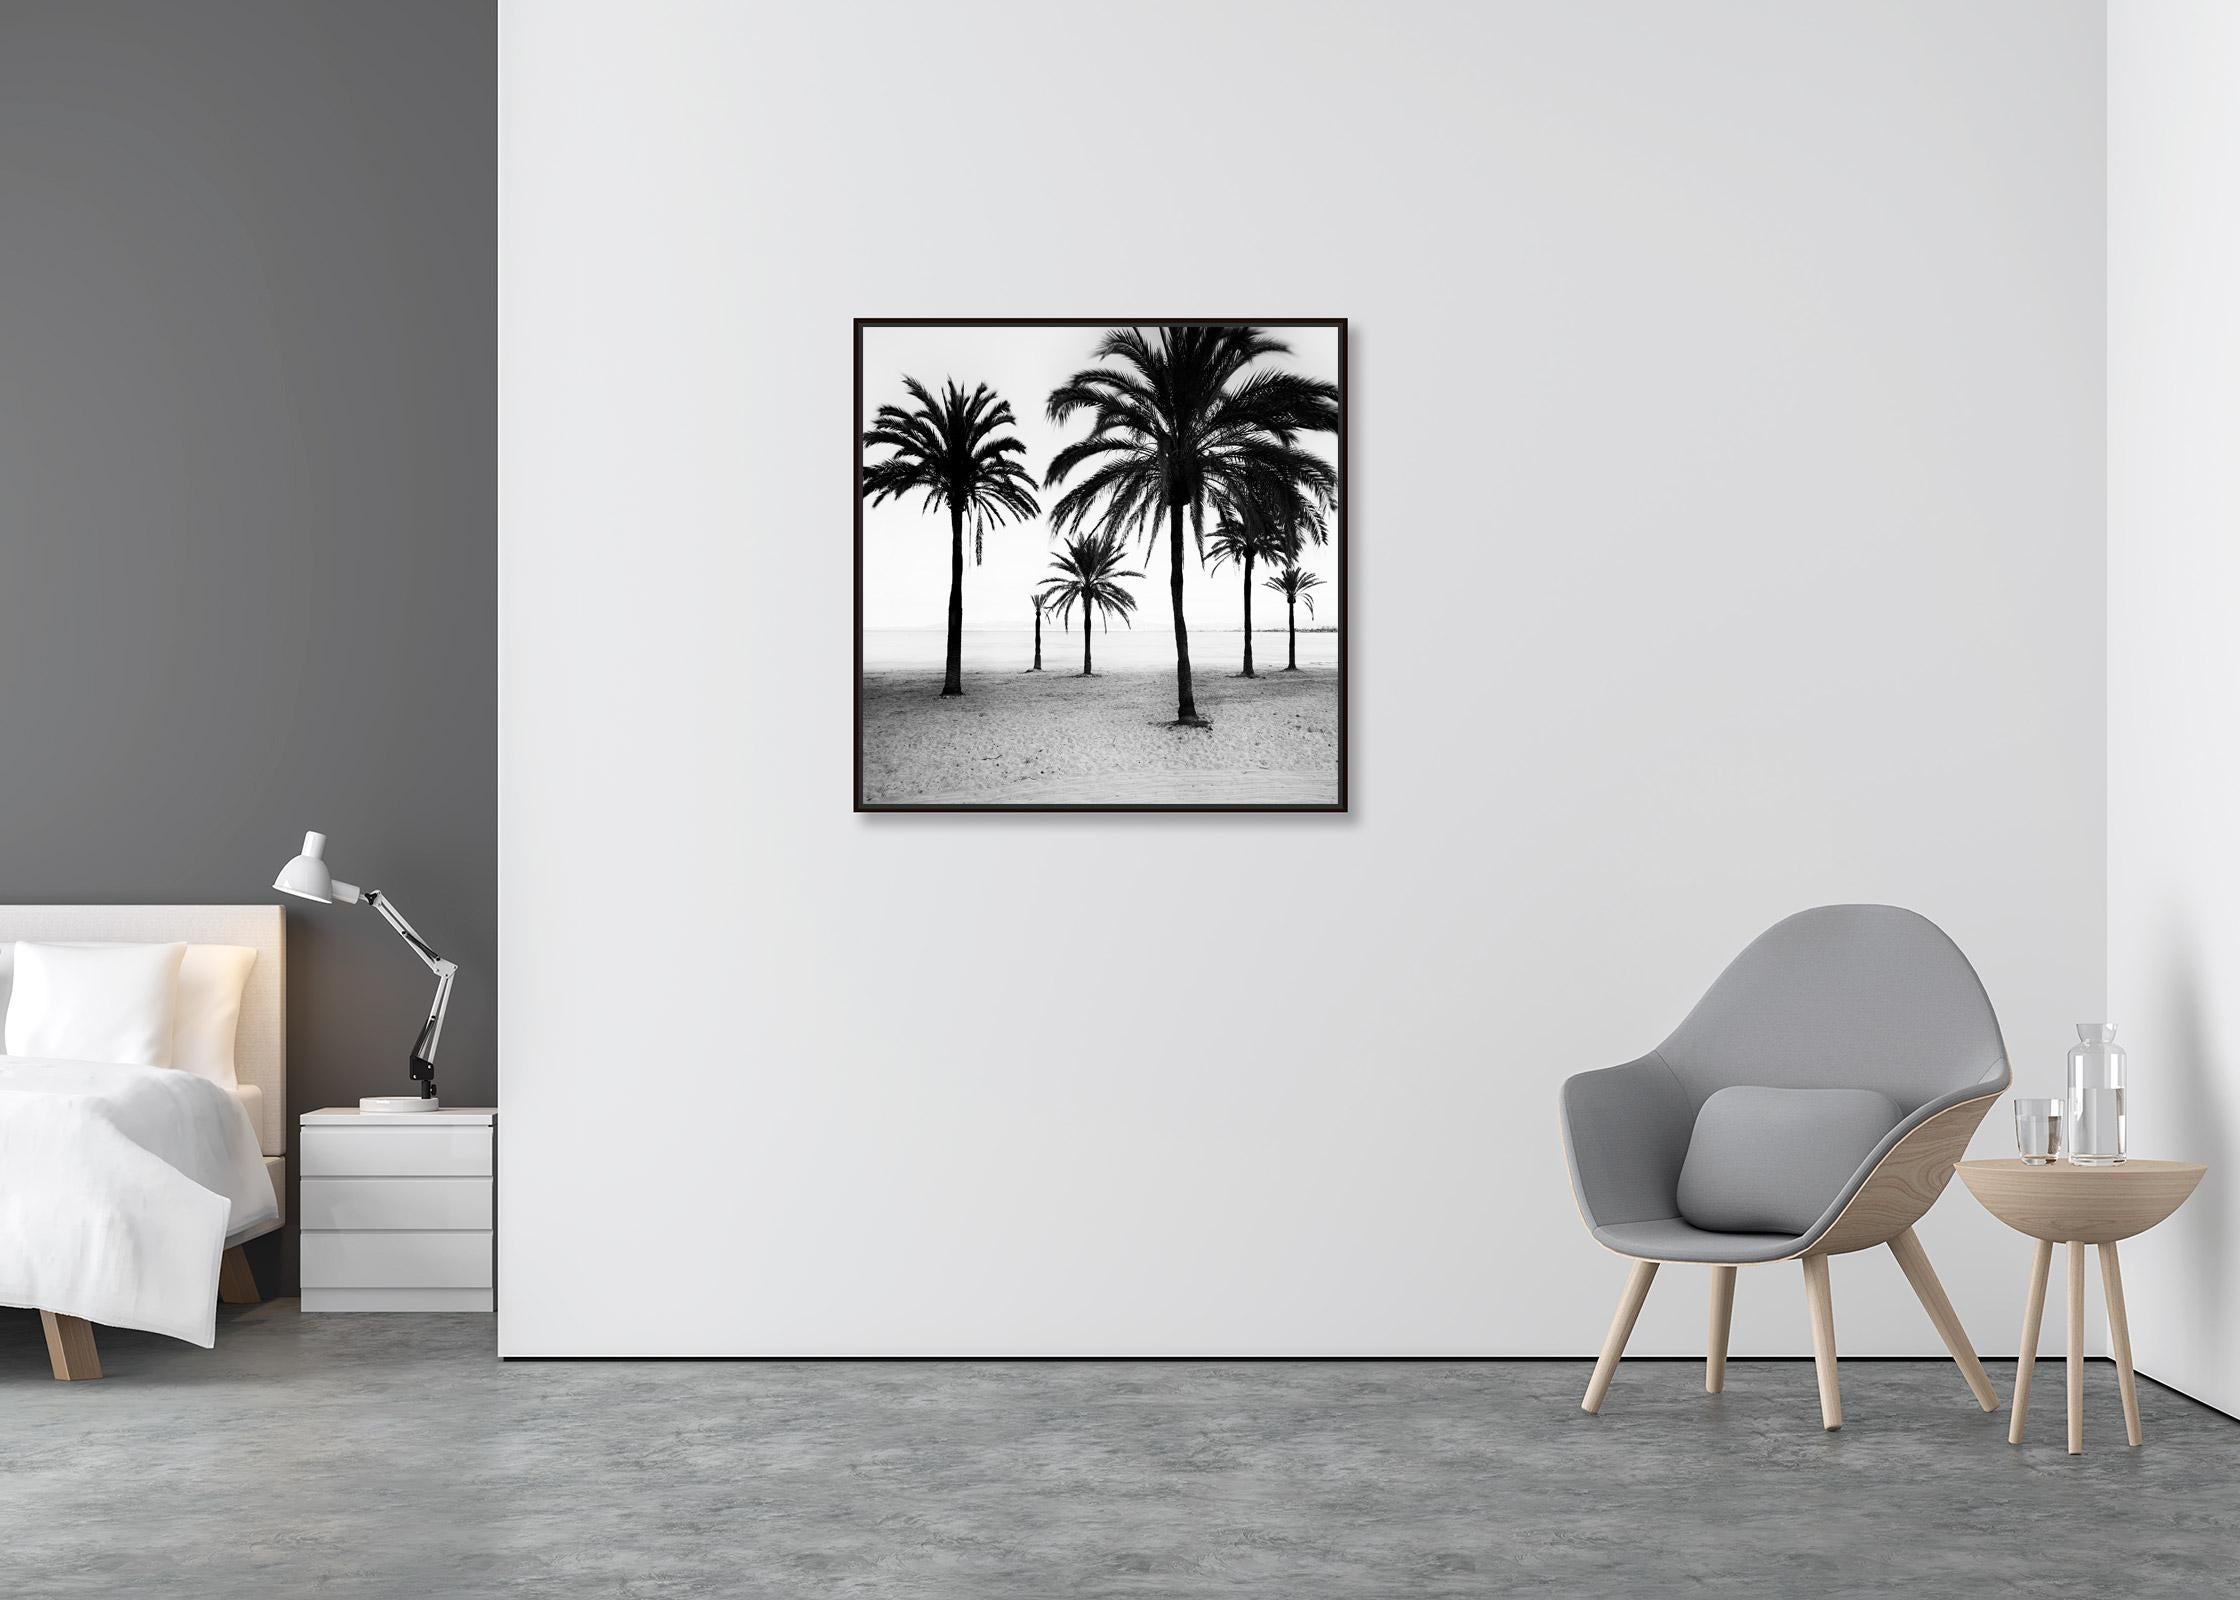 Palm Trees at the Beach, Mallorca, black and white photography, art landscape - Contemporary Photograph by Gerald Berghammer